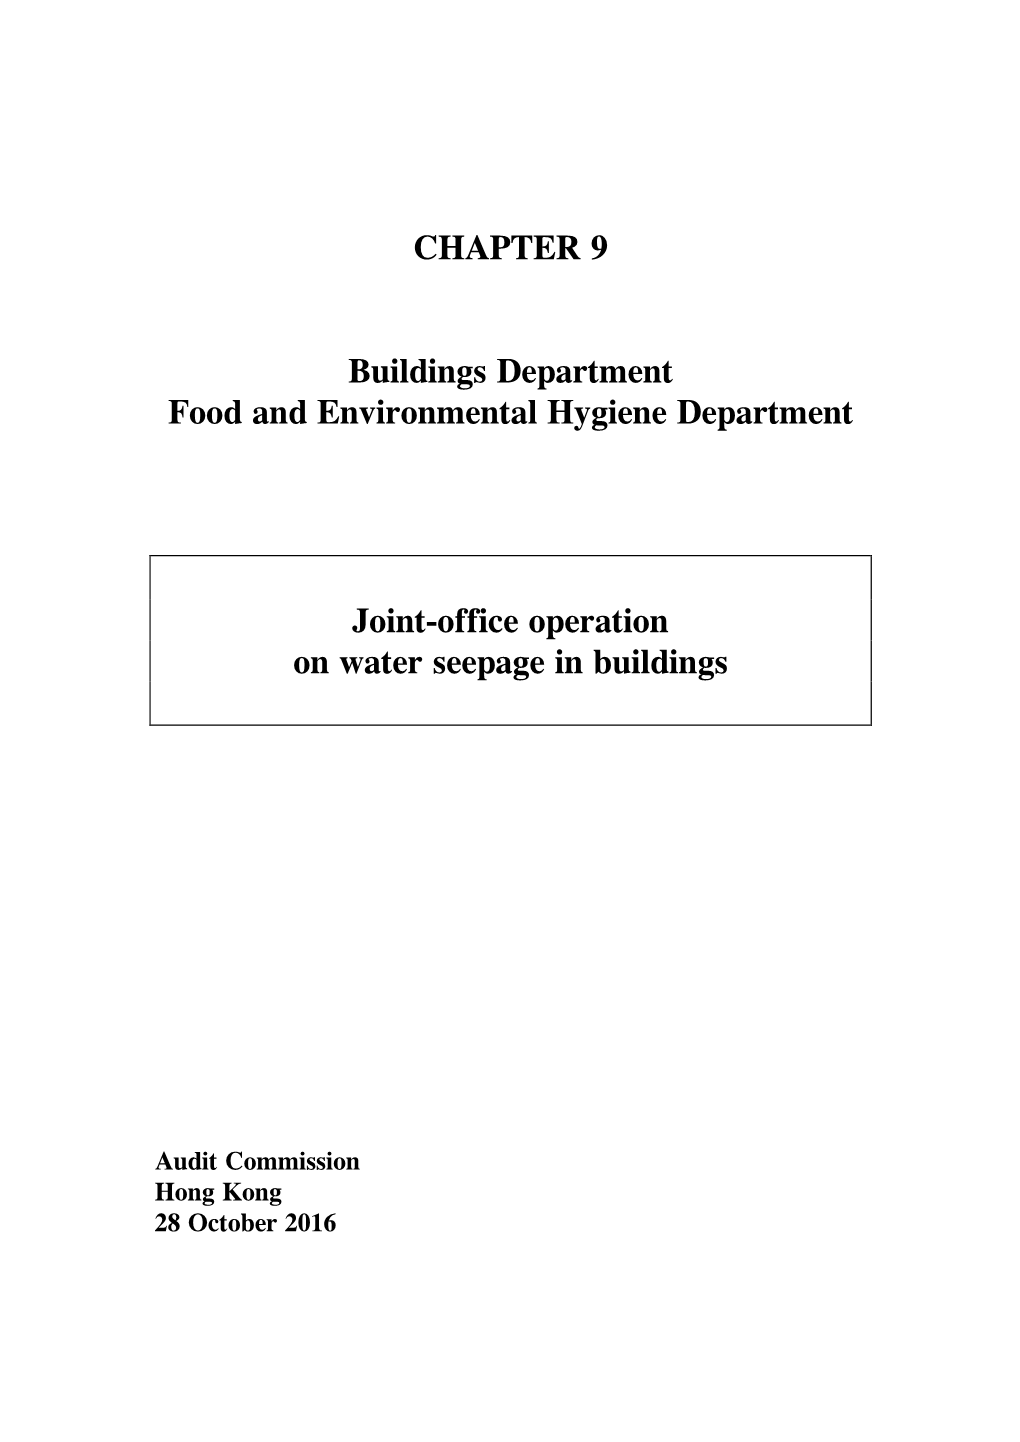 CHAPTER 9 Buildings Department Food and Environmental Hygiene